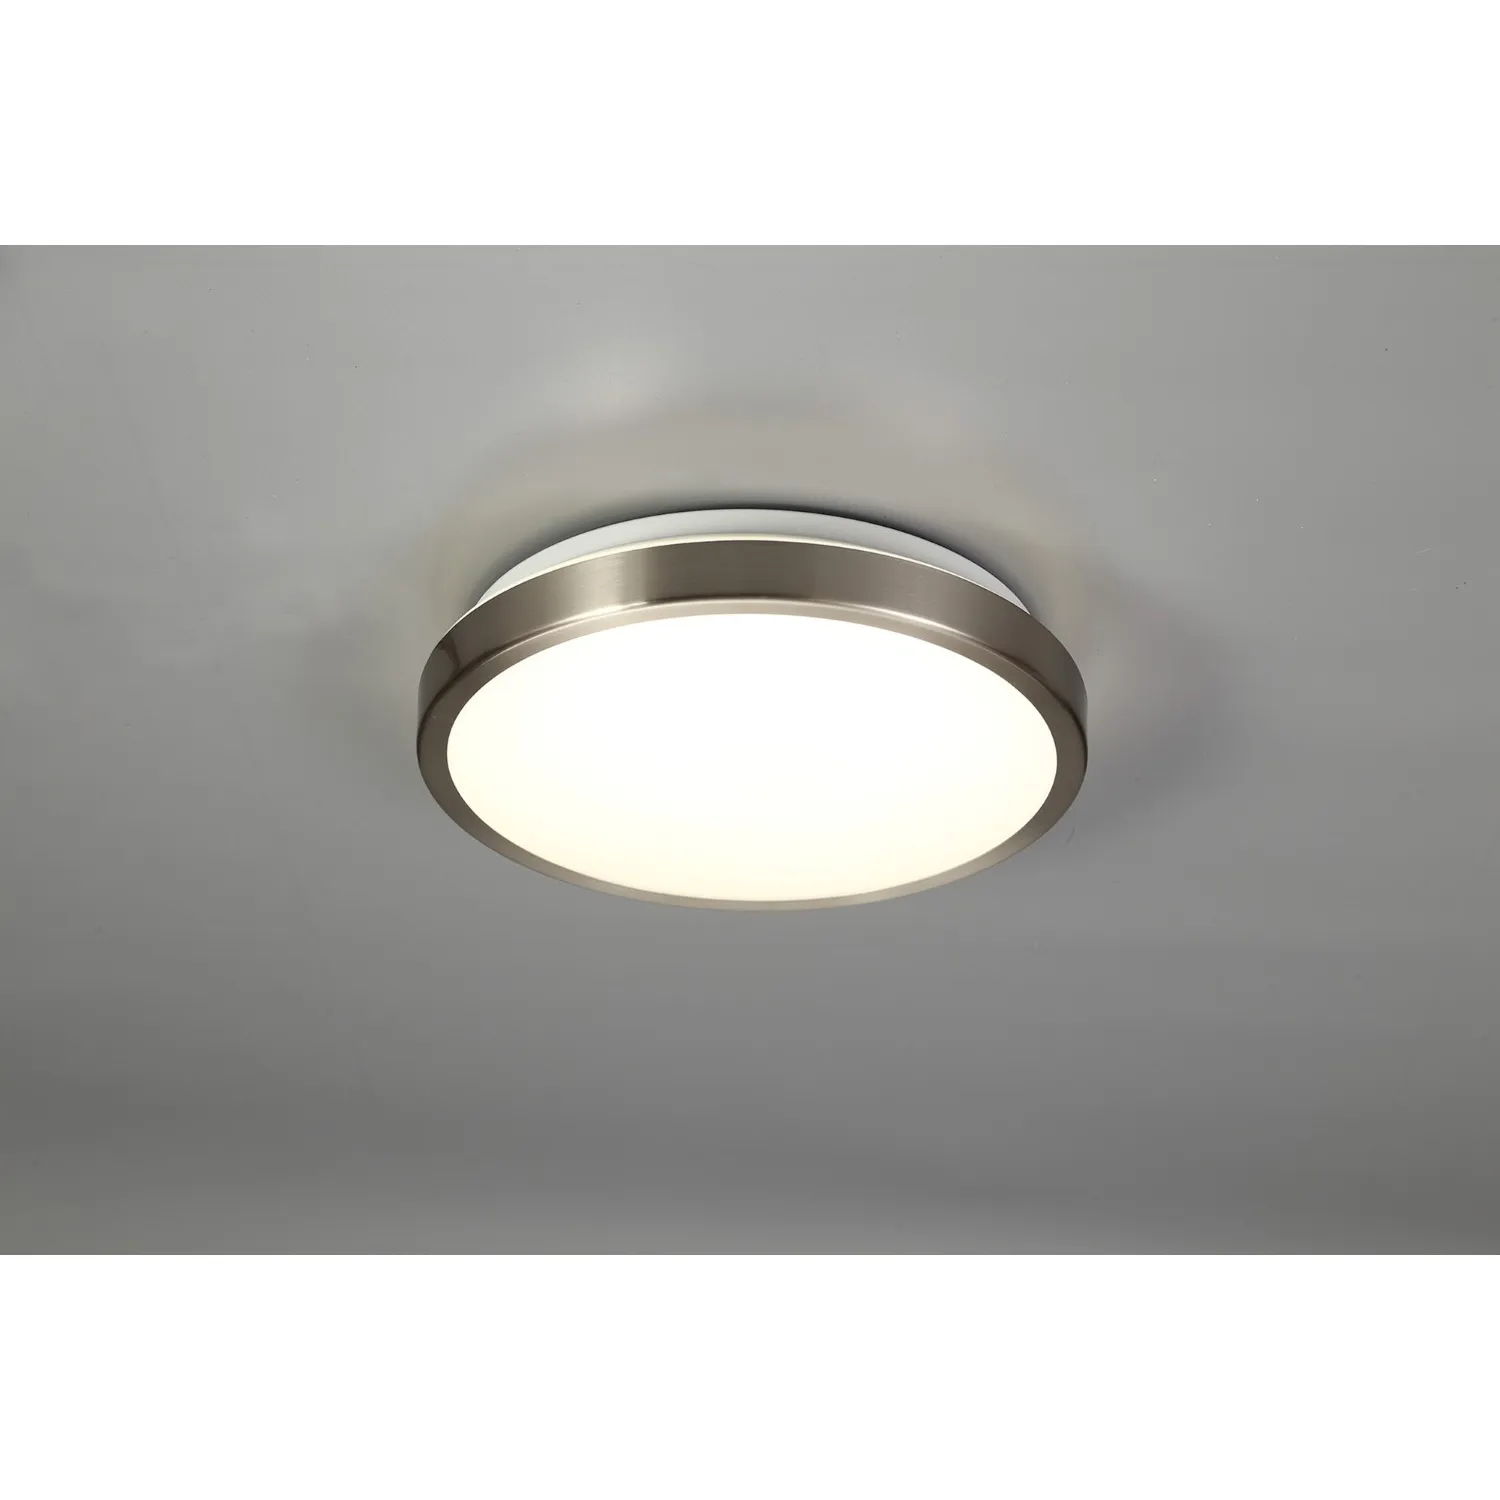 Southall Ceiling, 1 x 12W LED, 4000K, 3 Step Dimmable, 565lm, IP44, Satin Nickel White, 3yrs Warranty